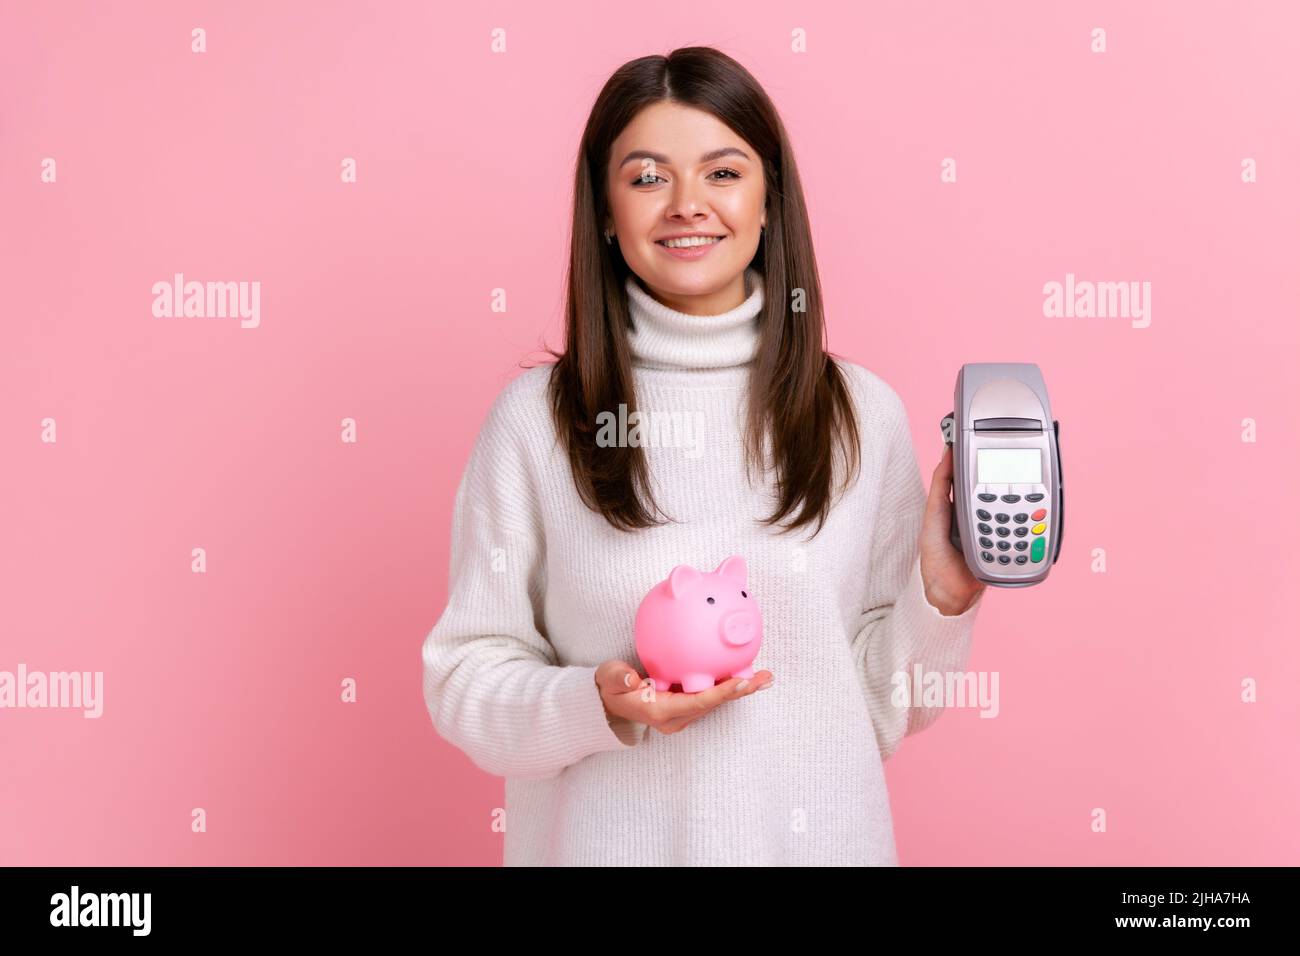 Pretty girl with dark hair showing pos payment terminal and piggybank, using cashless payments, nfc, wearing white casual style sweater. Indoor studio shot isolated on pink background. Stock Photo